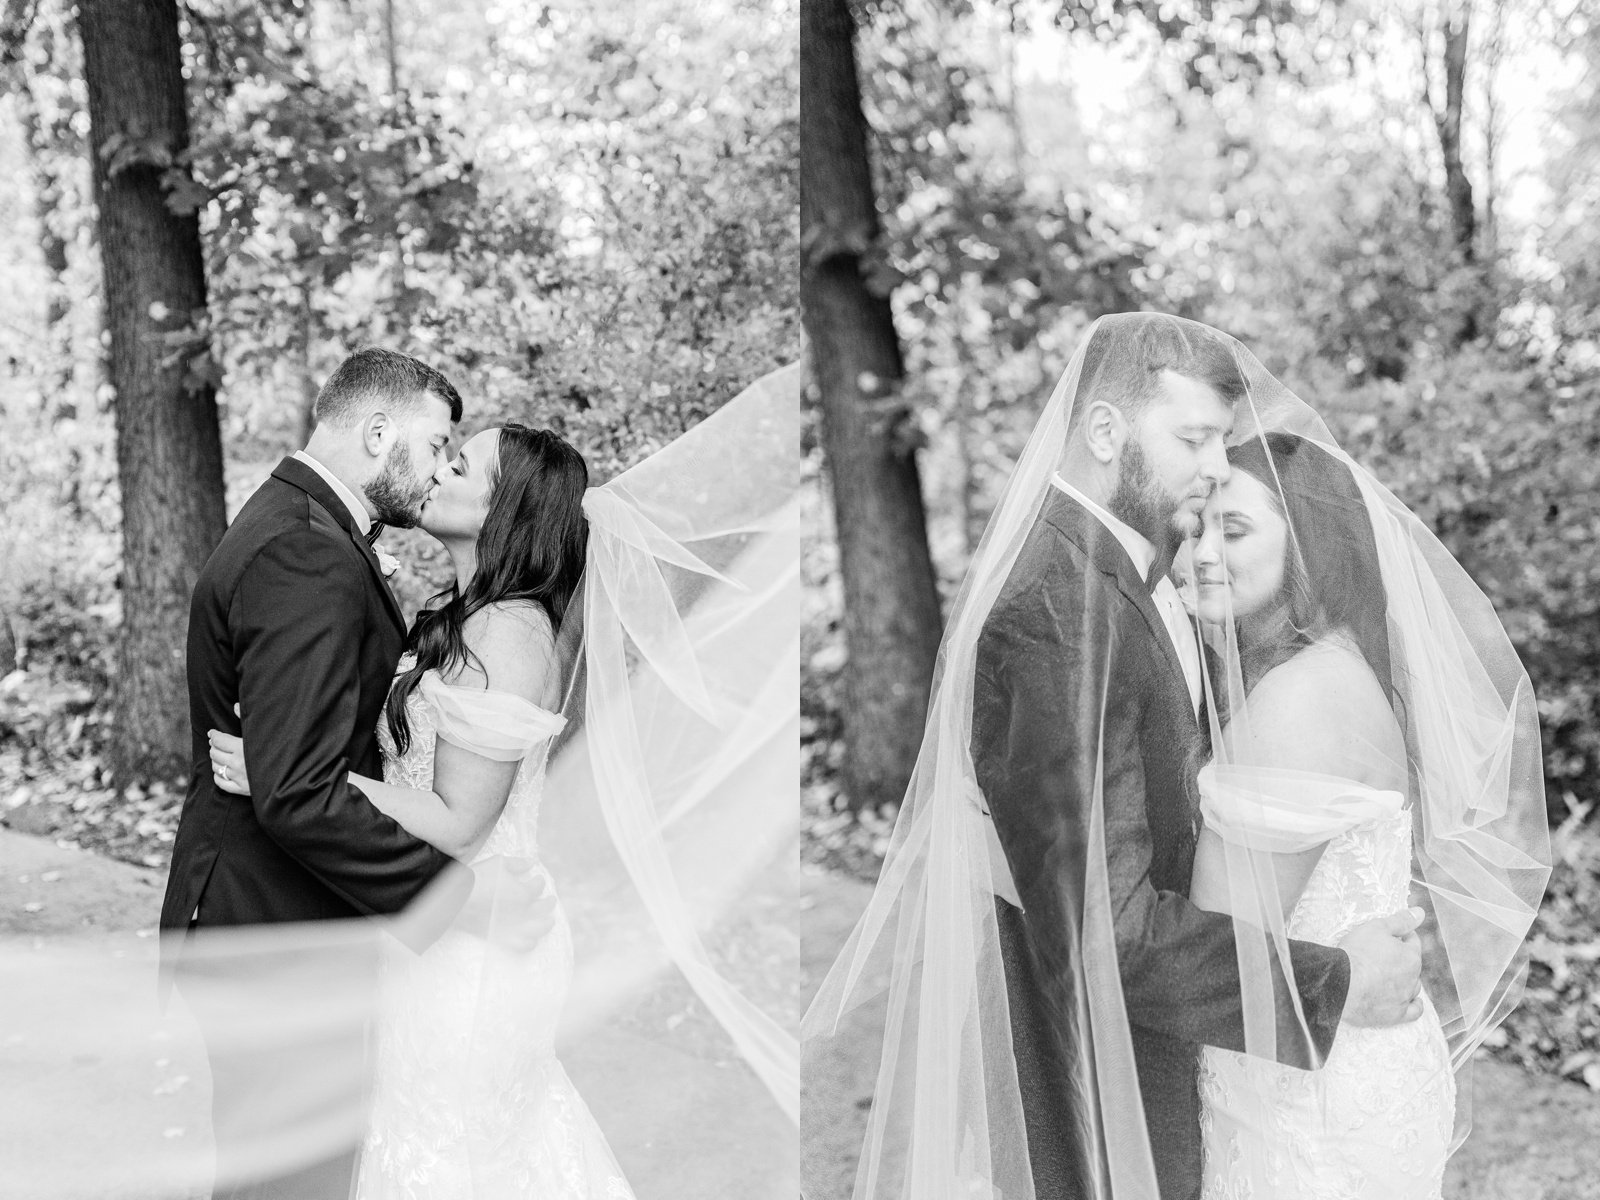 Fall Wedding at Bella Amore at Enchanted Acres in Dennison, Ohio